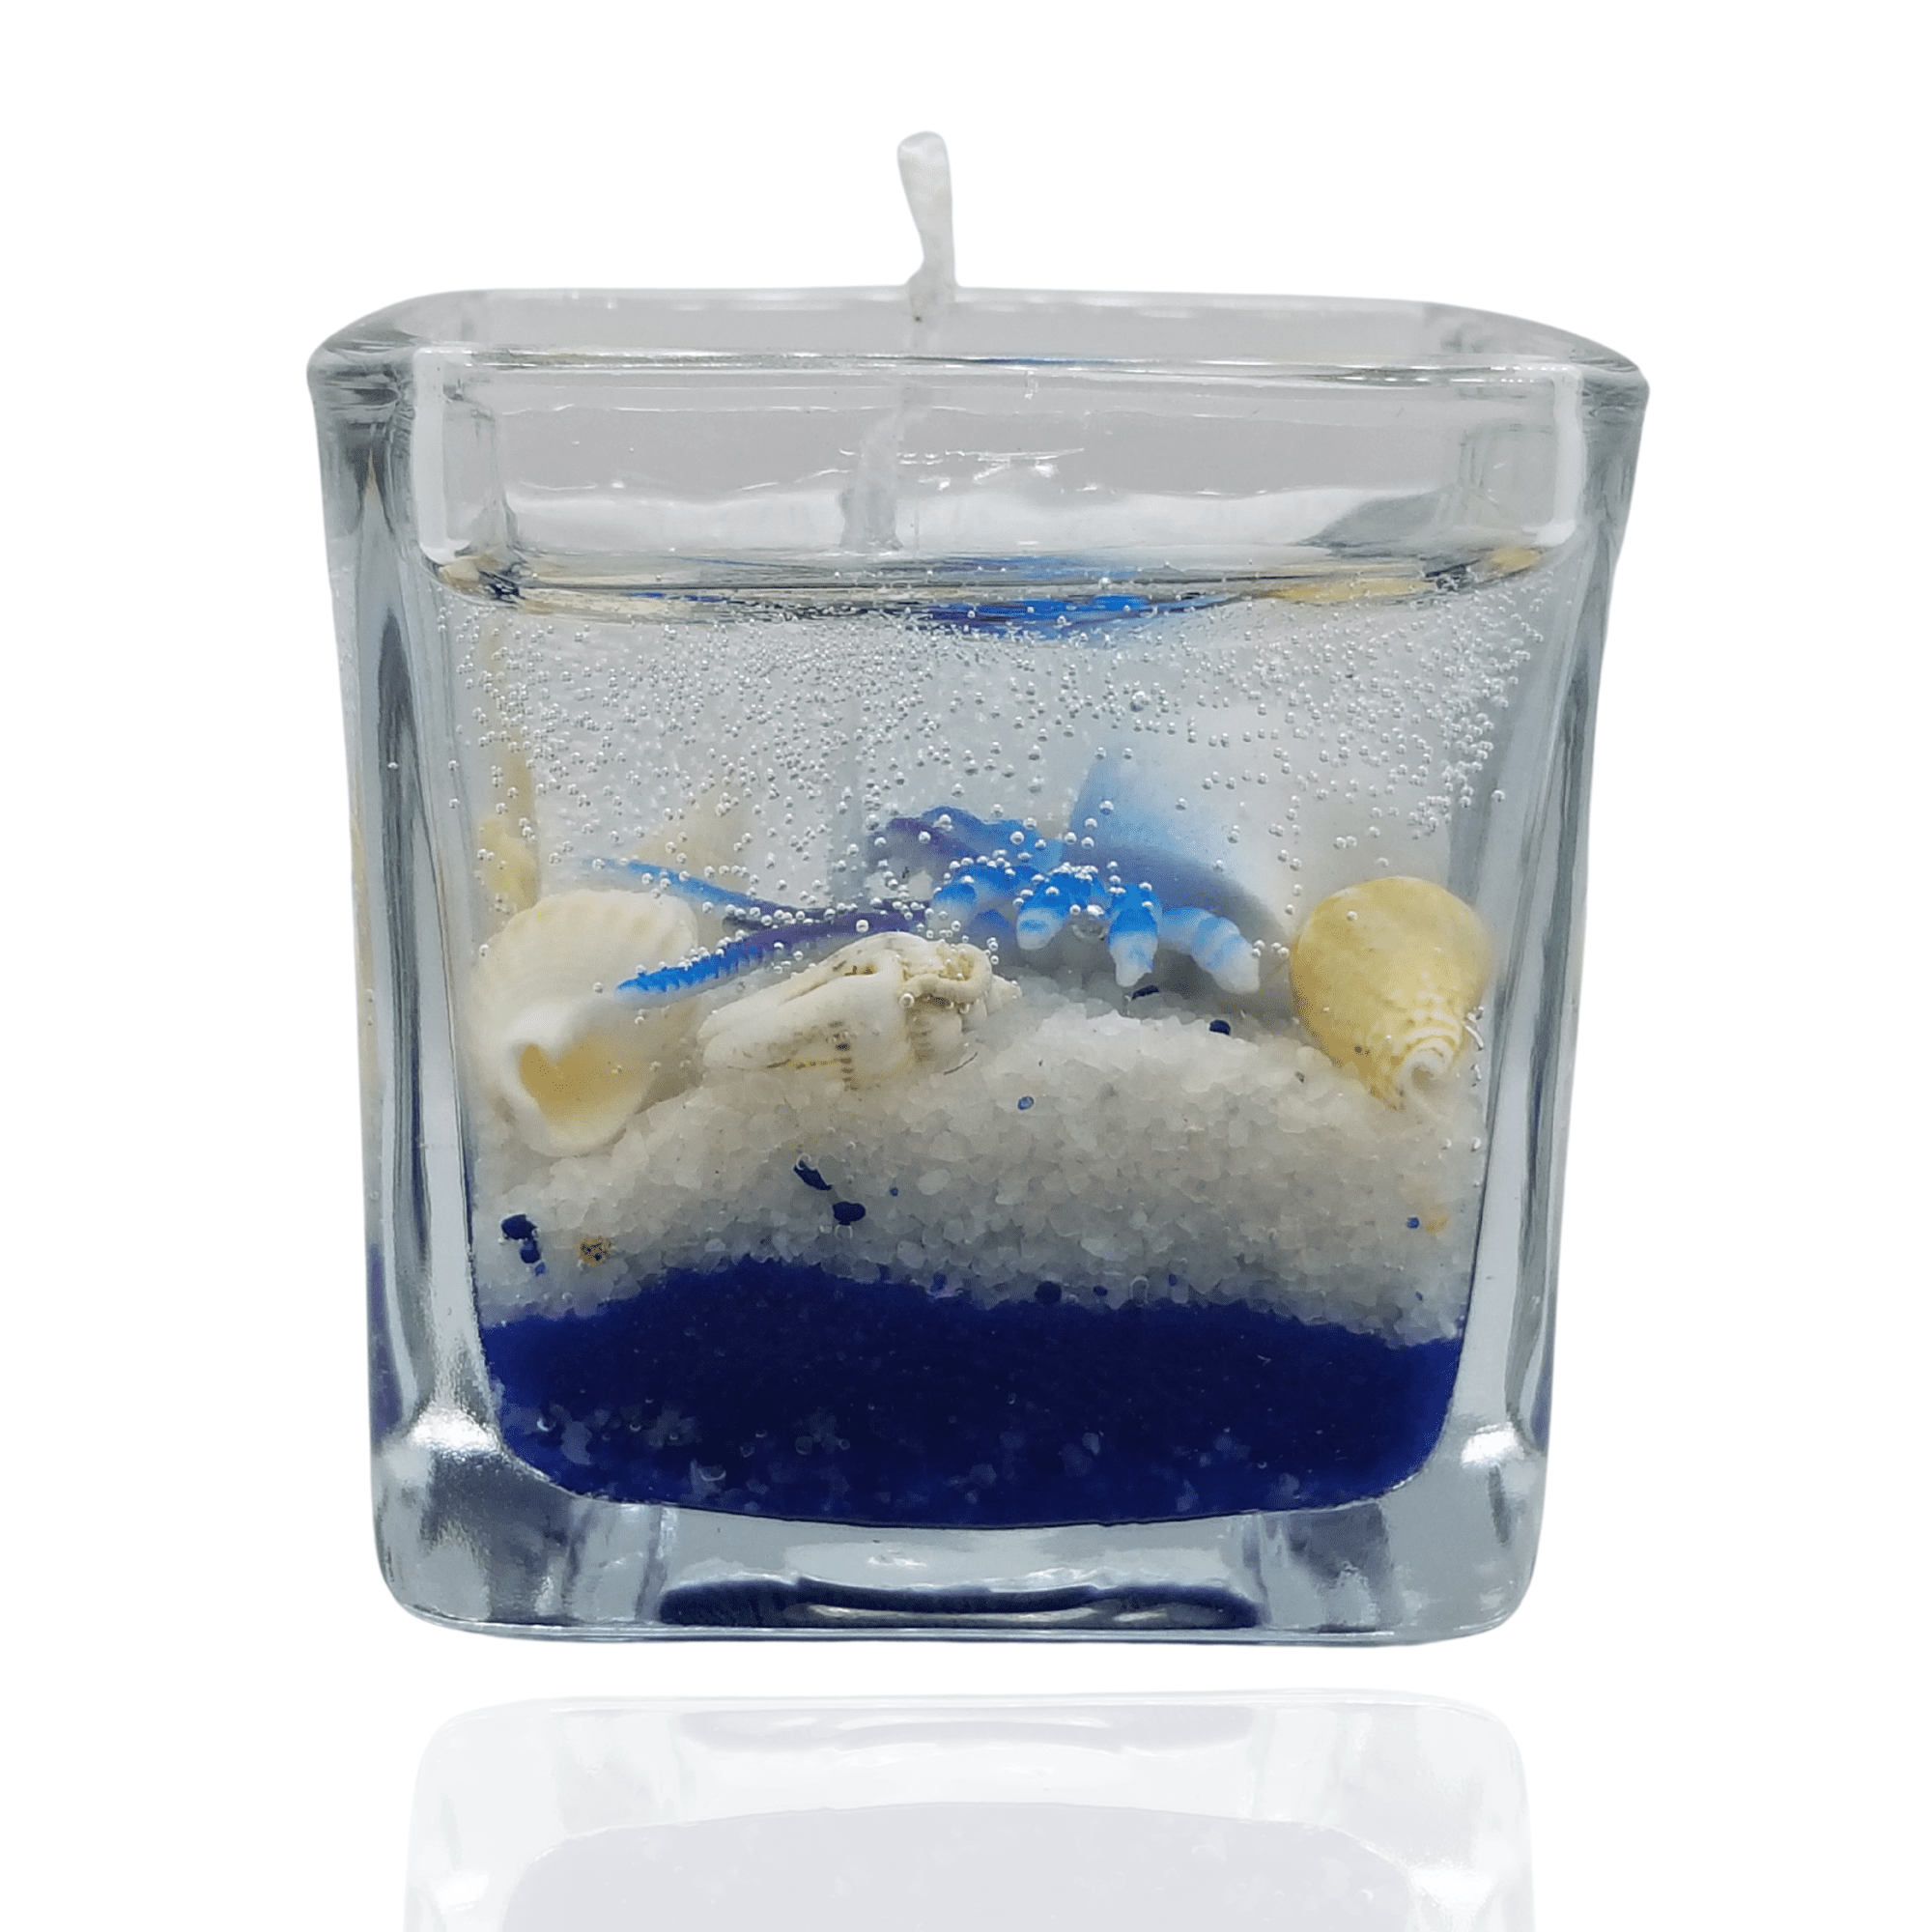 Scented Gel Wax Sea Candle Ocean Themed Candles Handmade and Eco-Friendly  Decorative Glass Body Relaxing and Stress Relief Candles for Home Bath  Decoration Wedding Party Favors & Gifts 7.7 Oz 